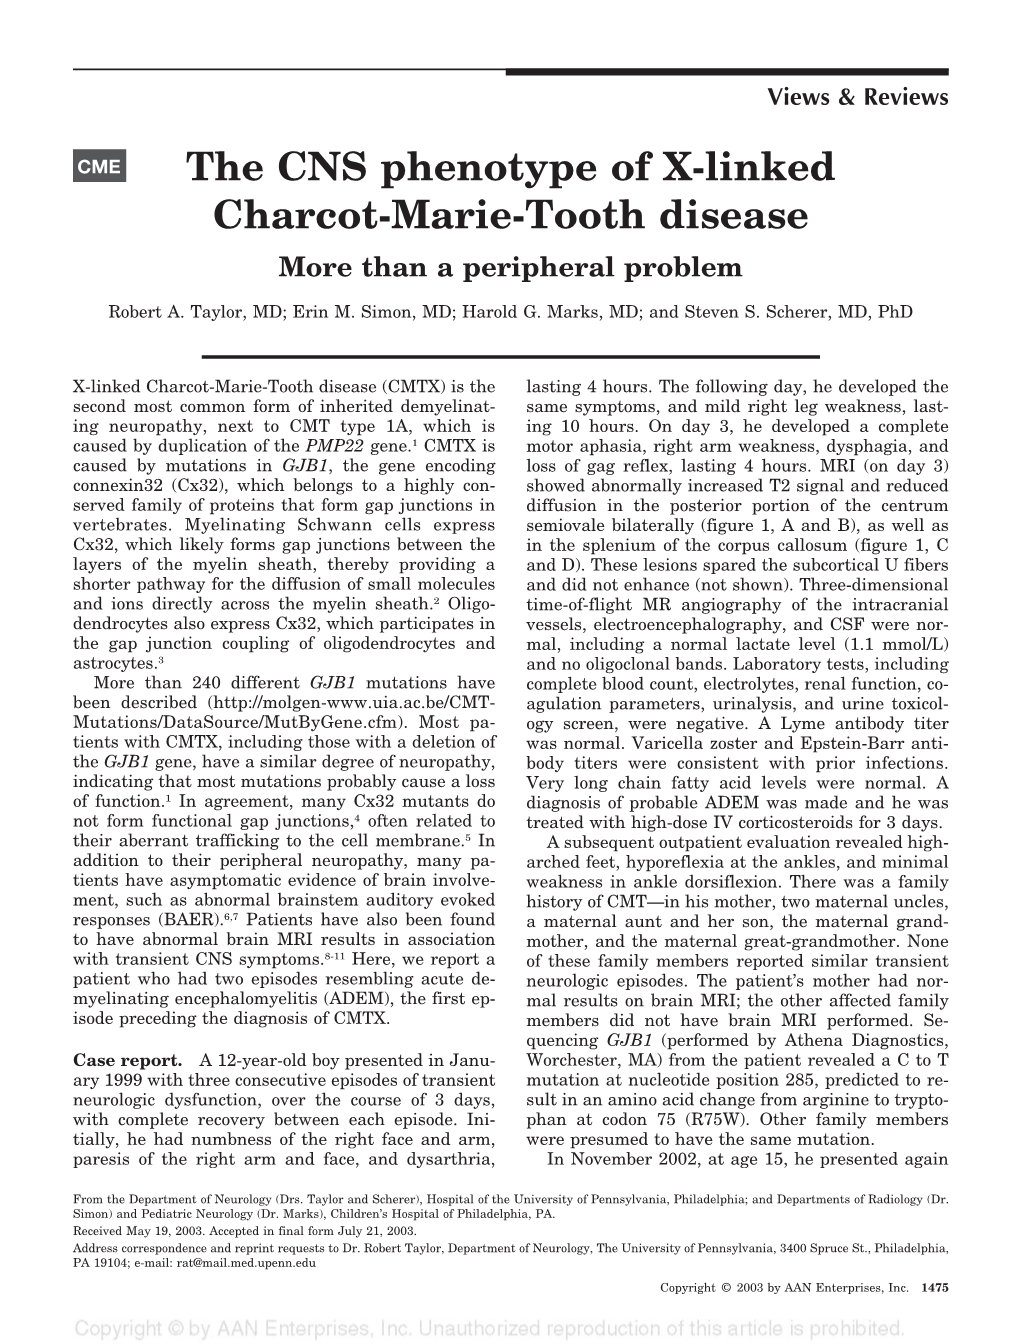 The CNS Phenotype of X-Linked Charcot-Marie-Tooth Disease More Than a Peripheral Problem